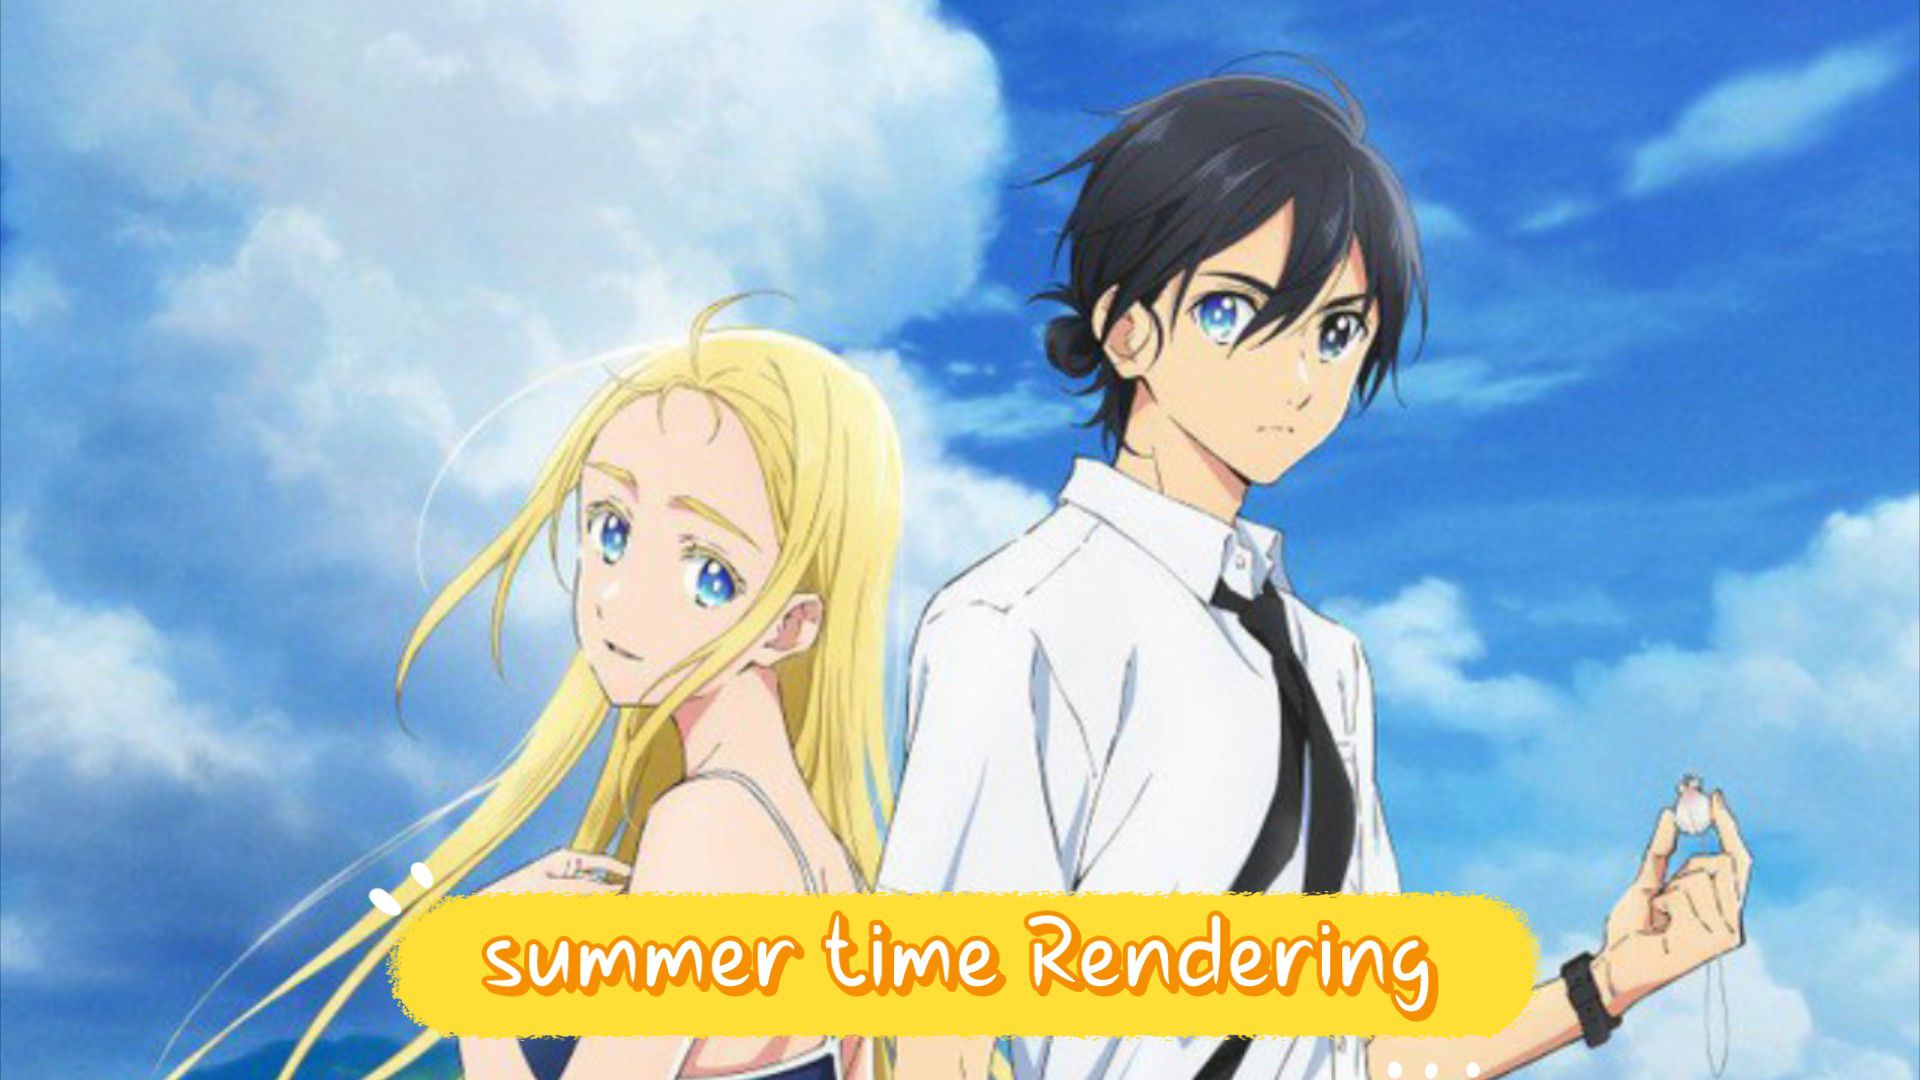 Summer Time Rendering Season 1 Episode 4 Release Date and Time